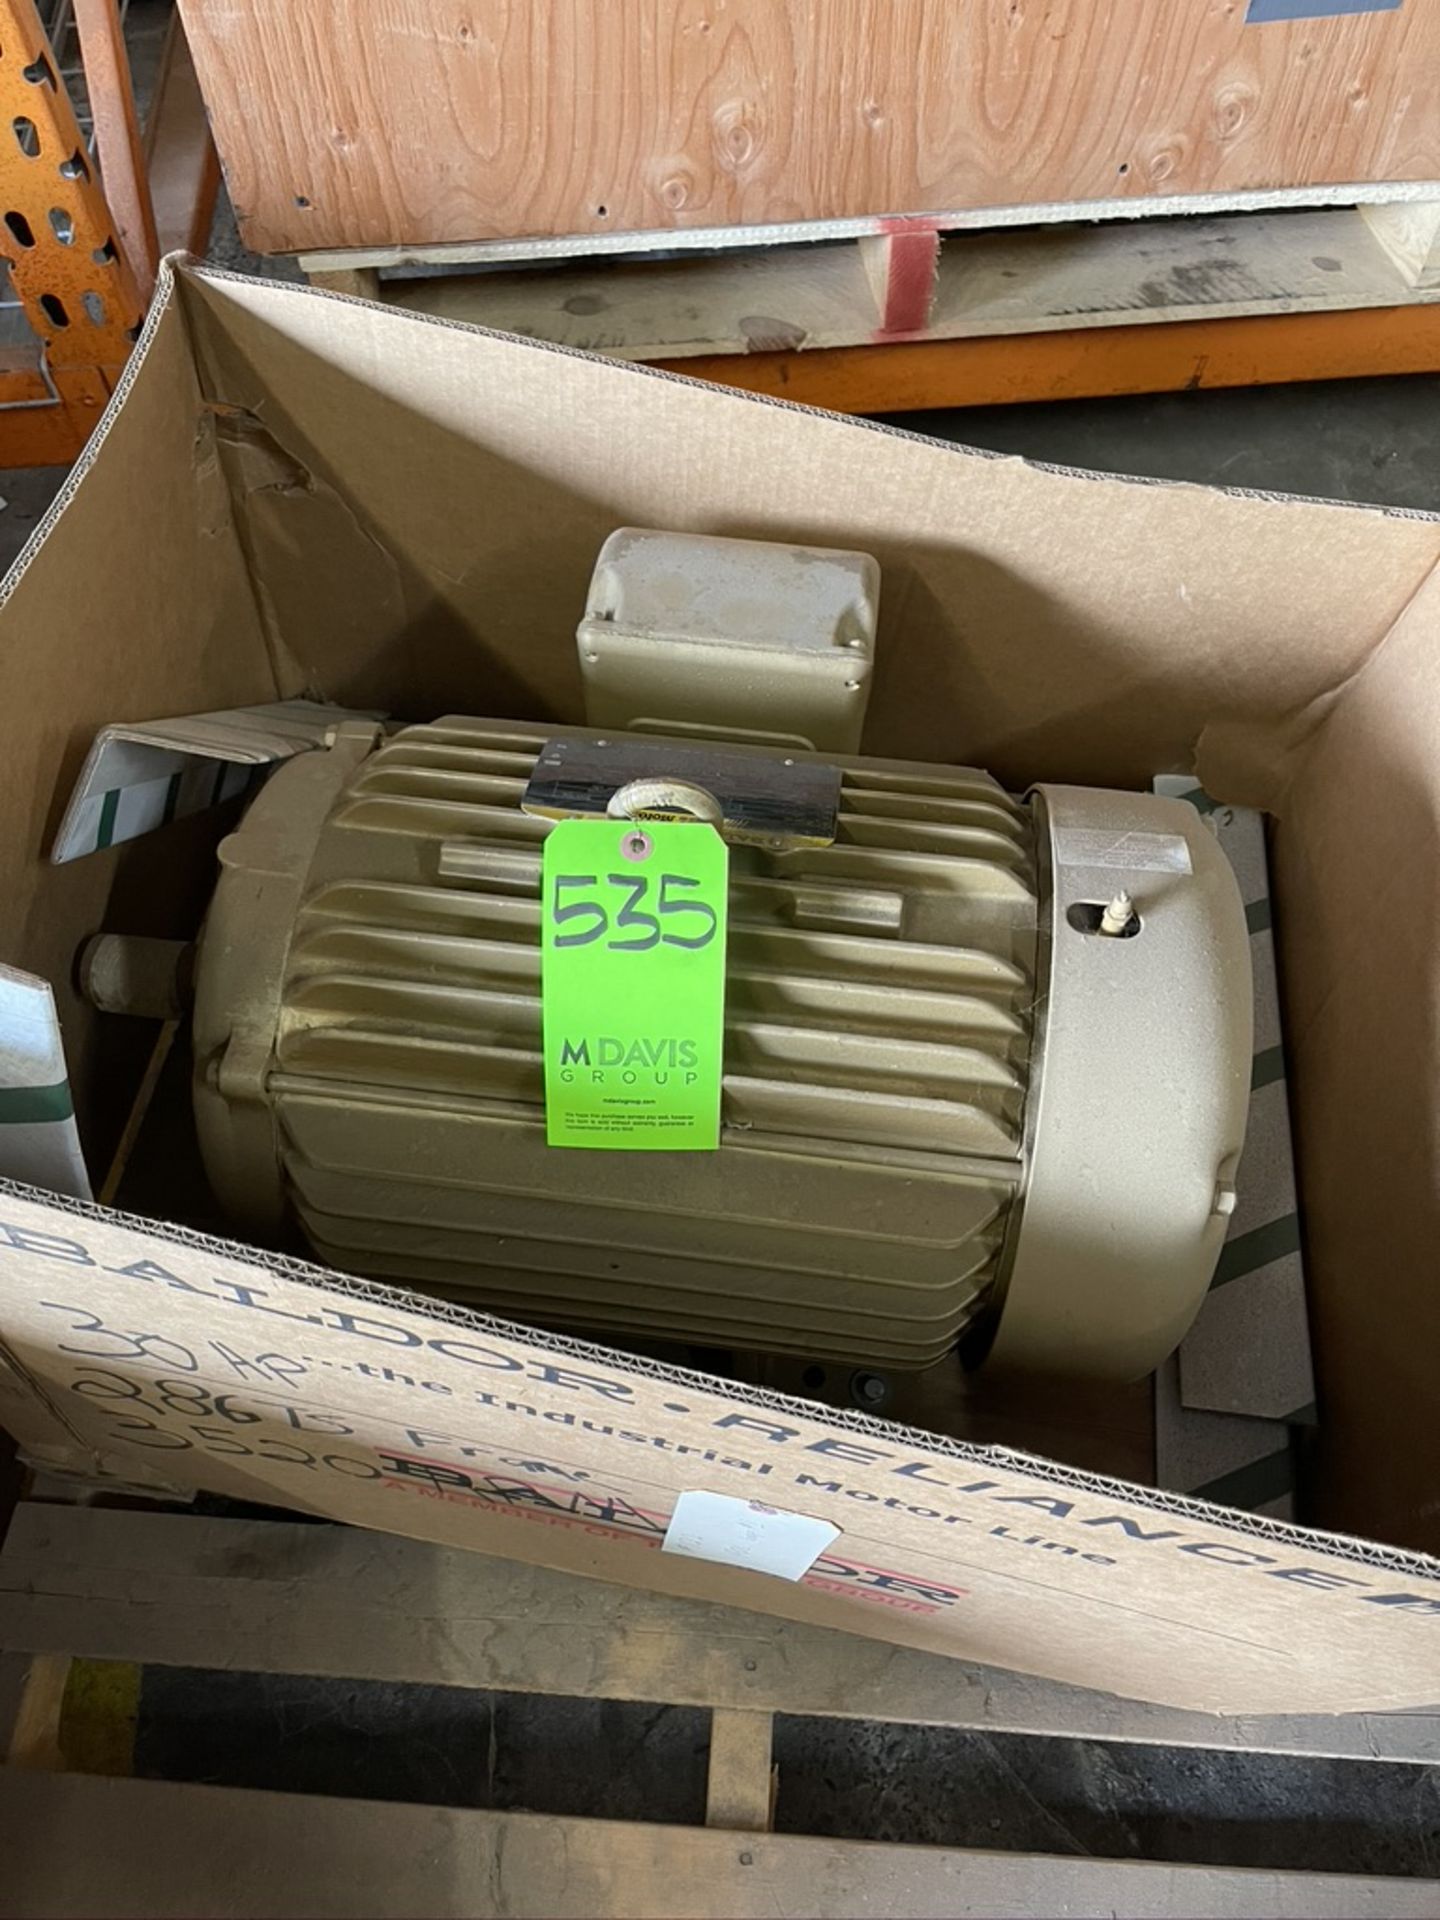 BALDOR MOTOR 30 HP 3520 RPM 230/460 V (BELIEVED TO BE NEW)